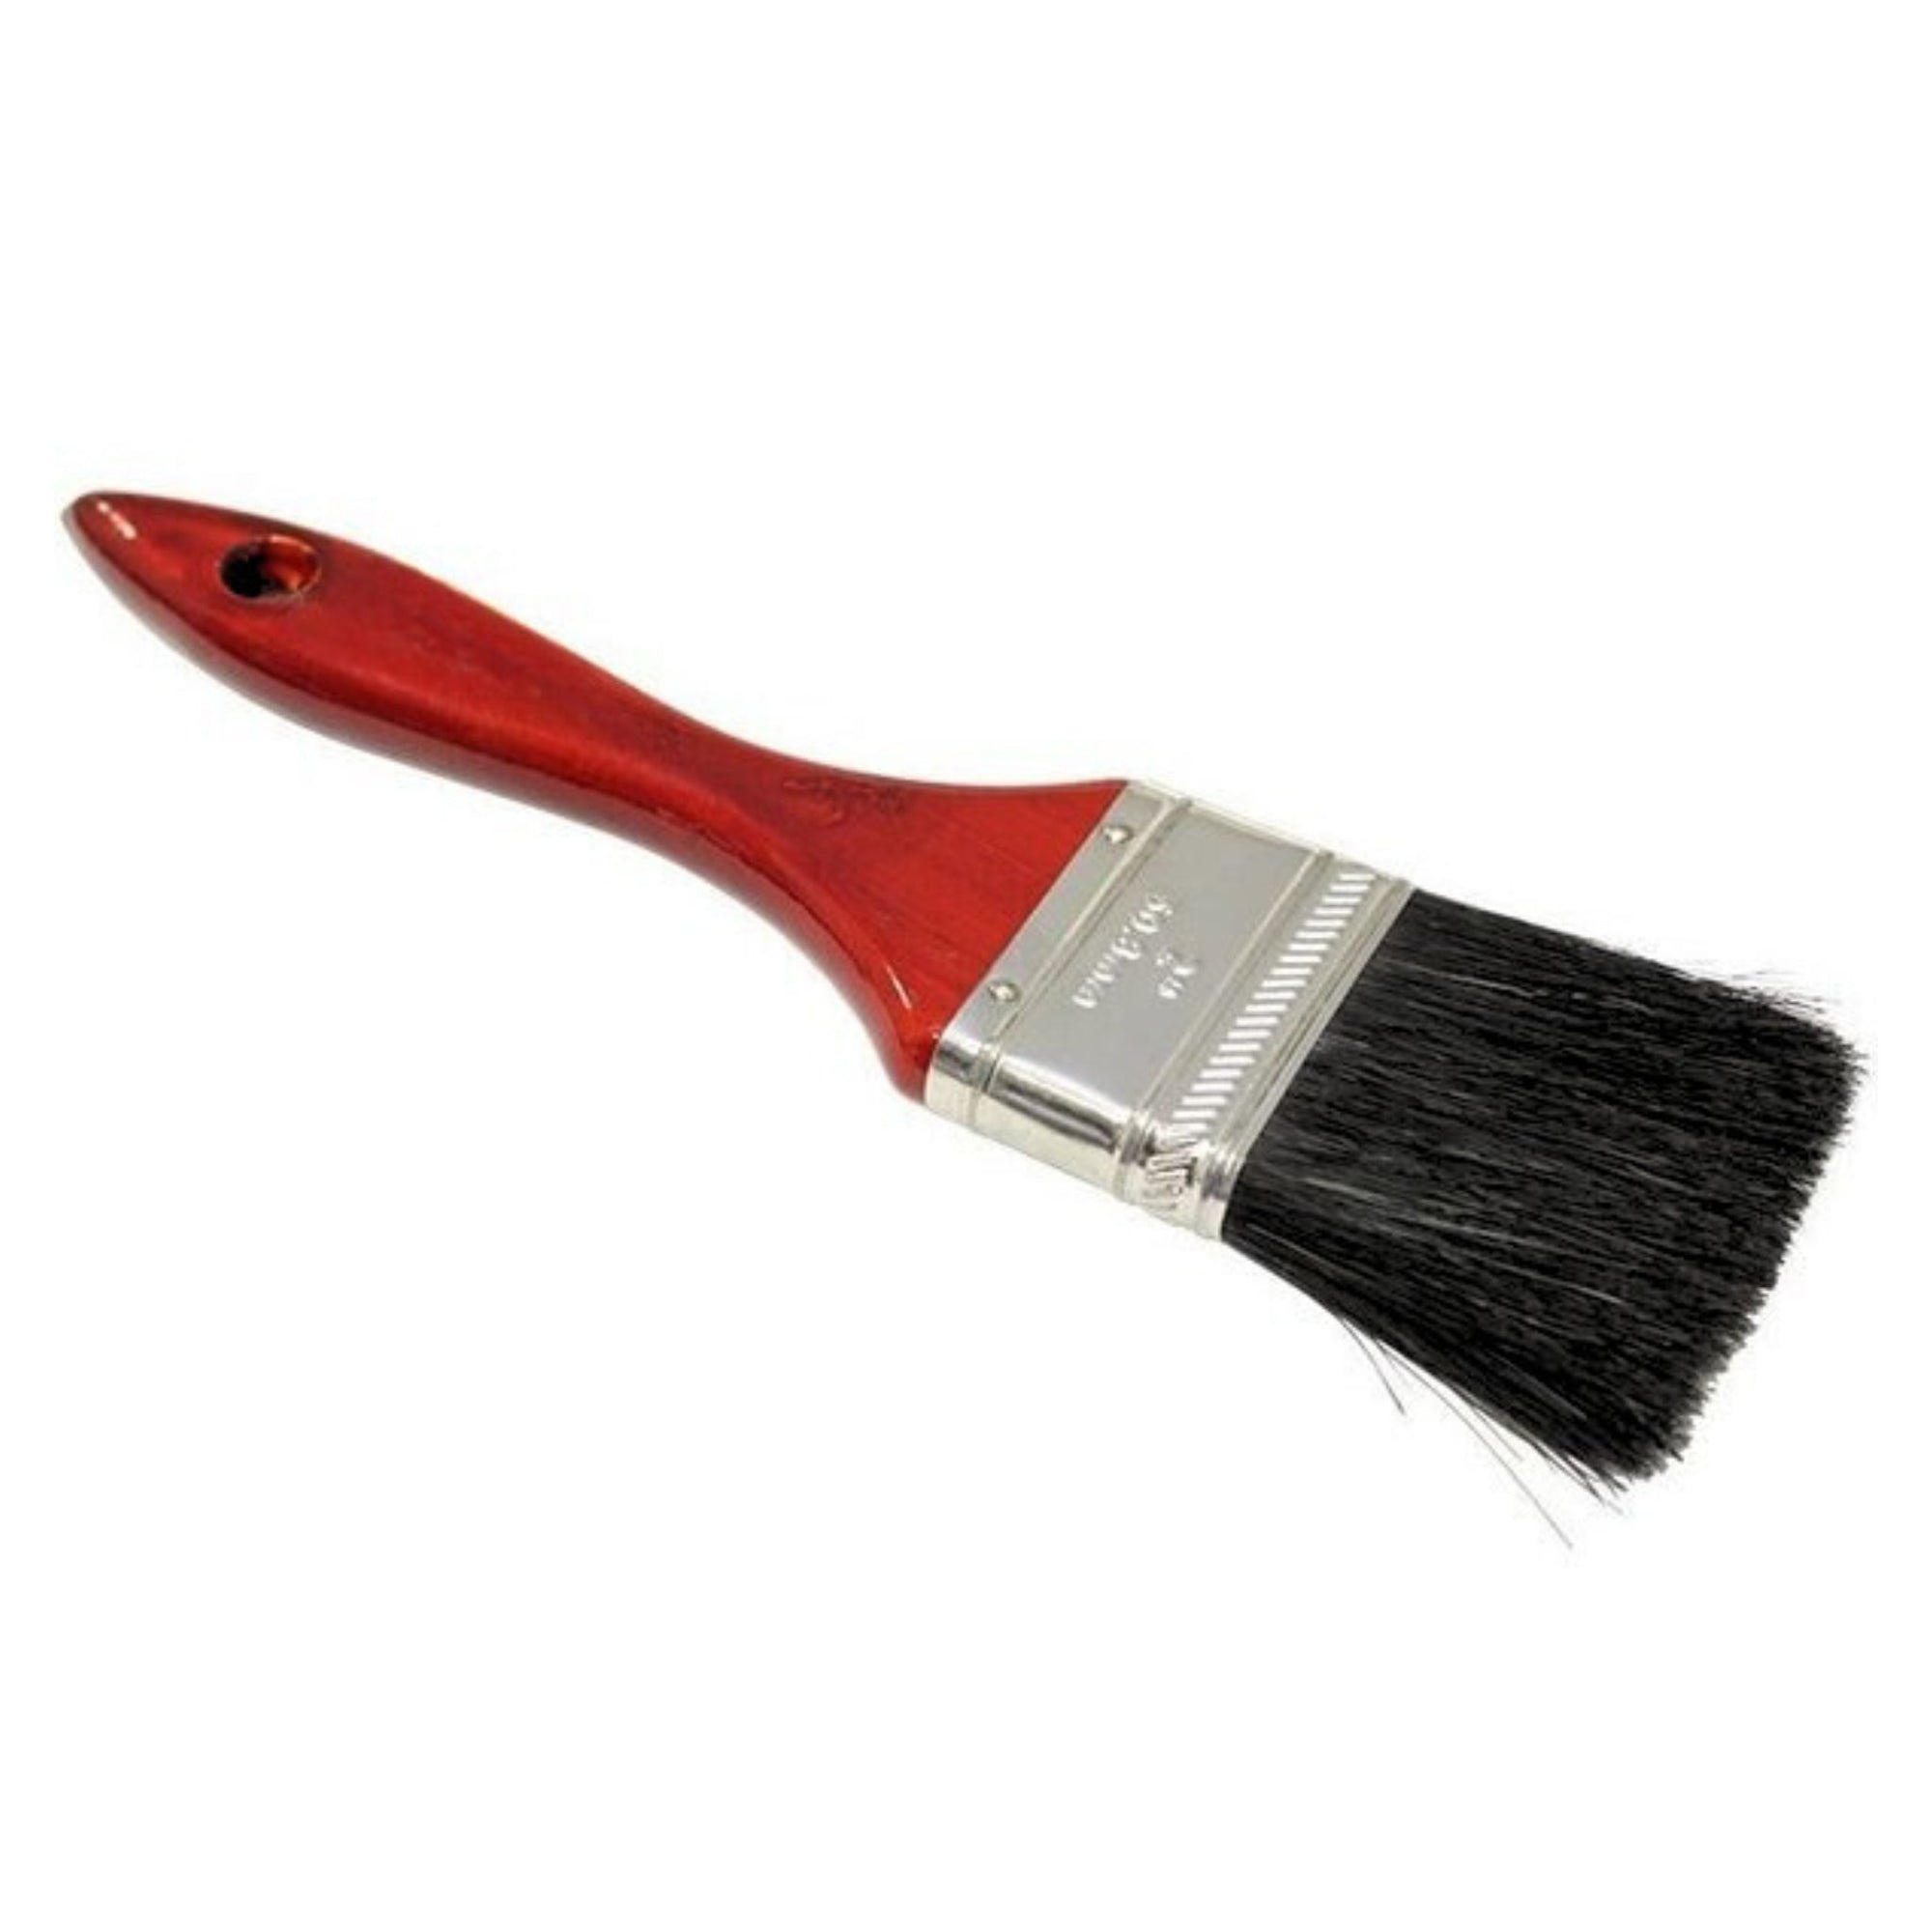 2" (50mm) Natural Bristle Flat Paint Brush - South East Clearance Centre